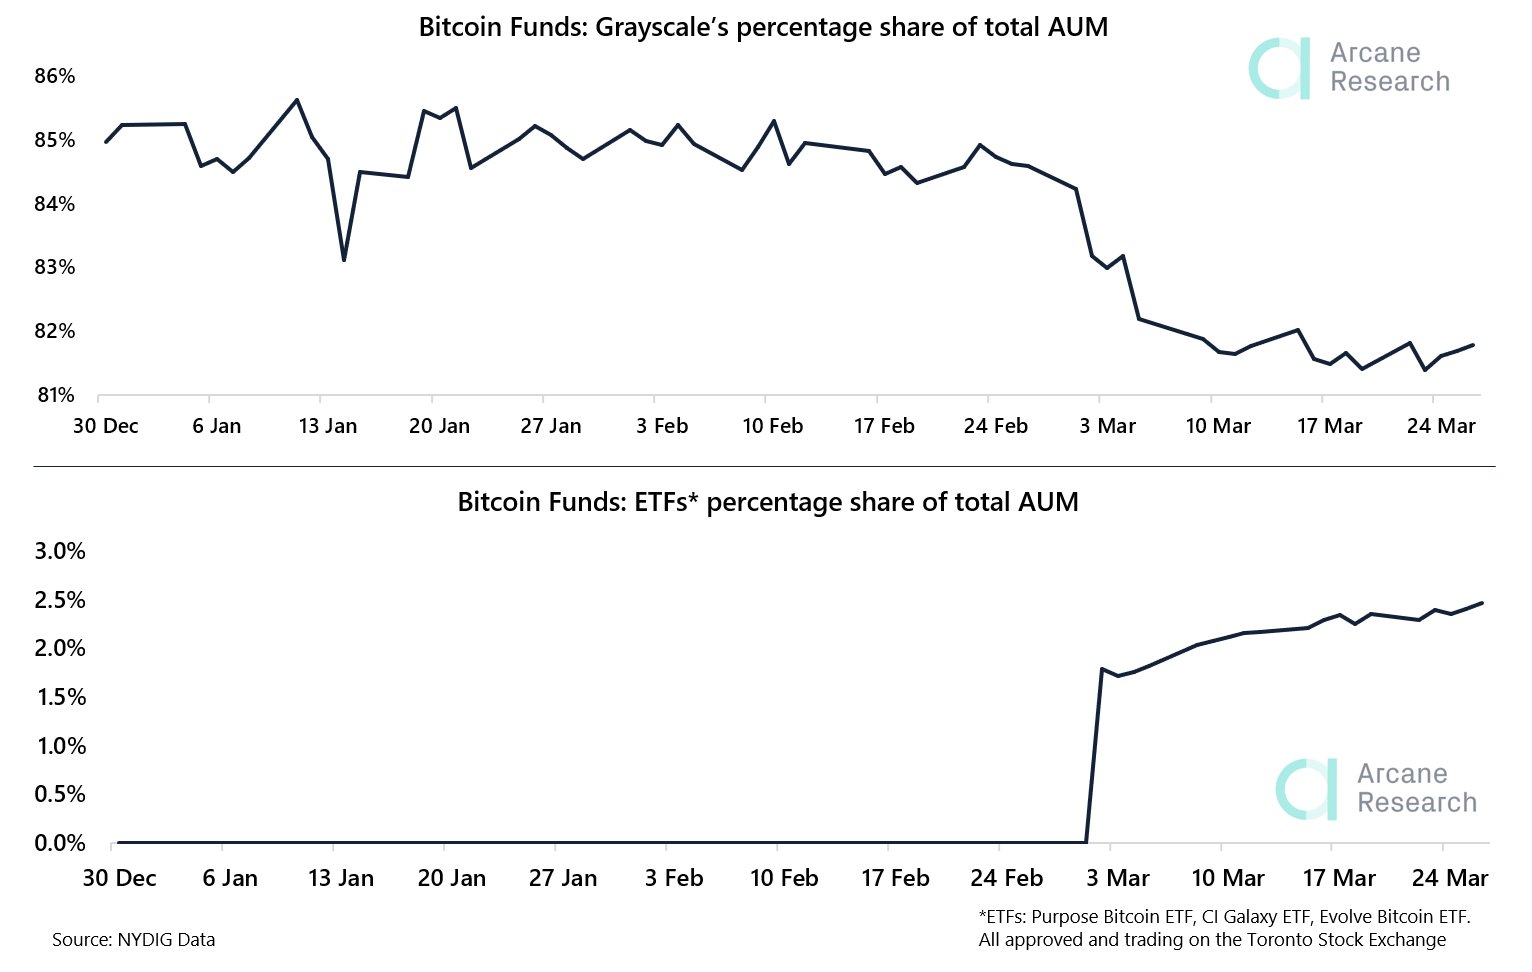 Bitcoin Funds Grayscale's percentage share of total AUM